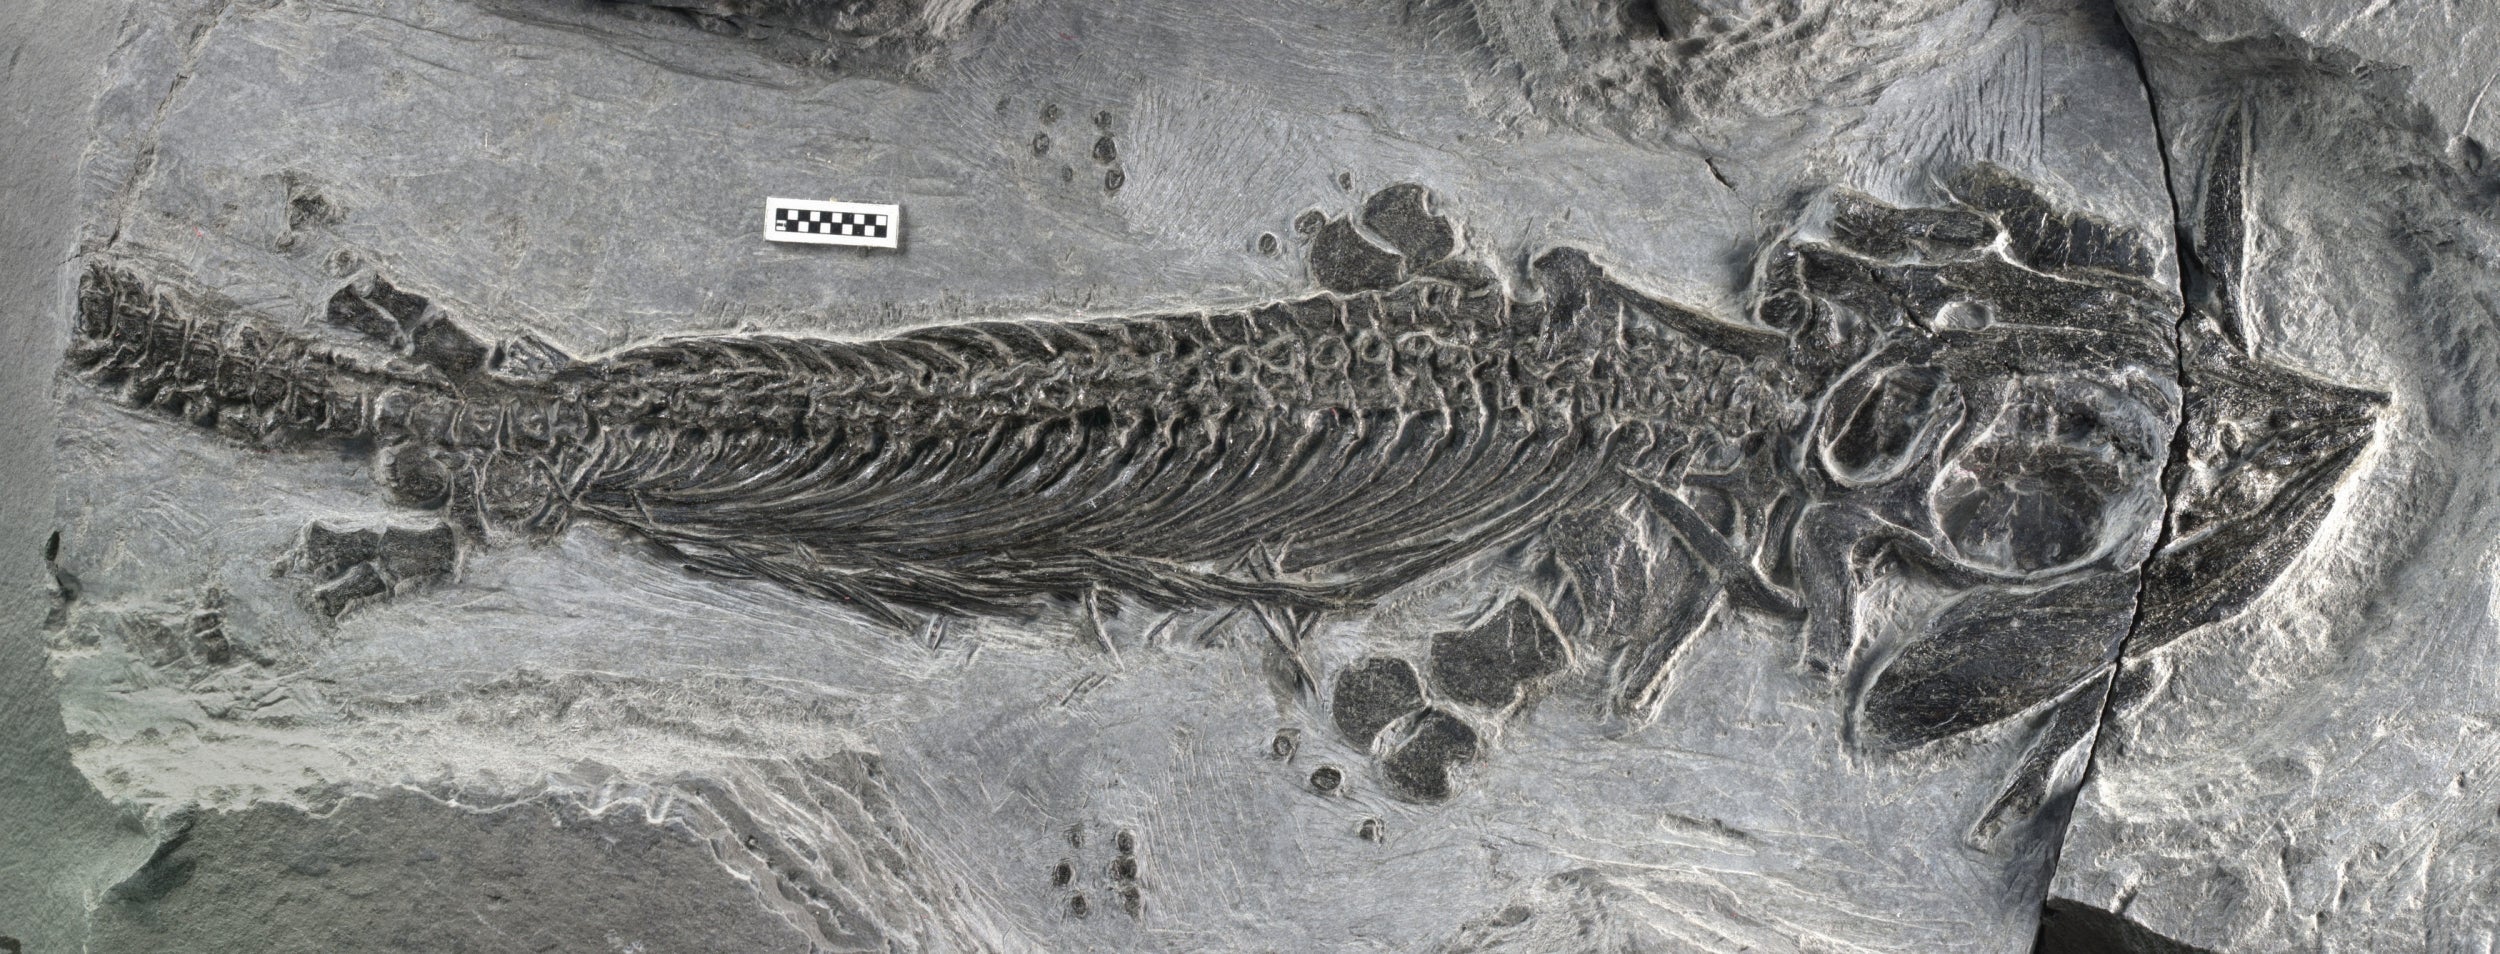 Photo issued by the Field Museum Chicago of a fossil specimen of Cartorhynchus lenticarpus, a small early ichthyosaur with a short snout and seal-like appendage